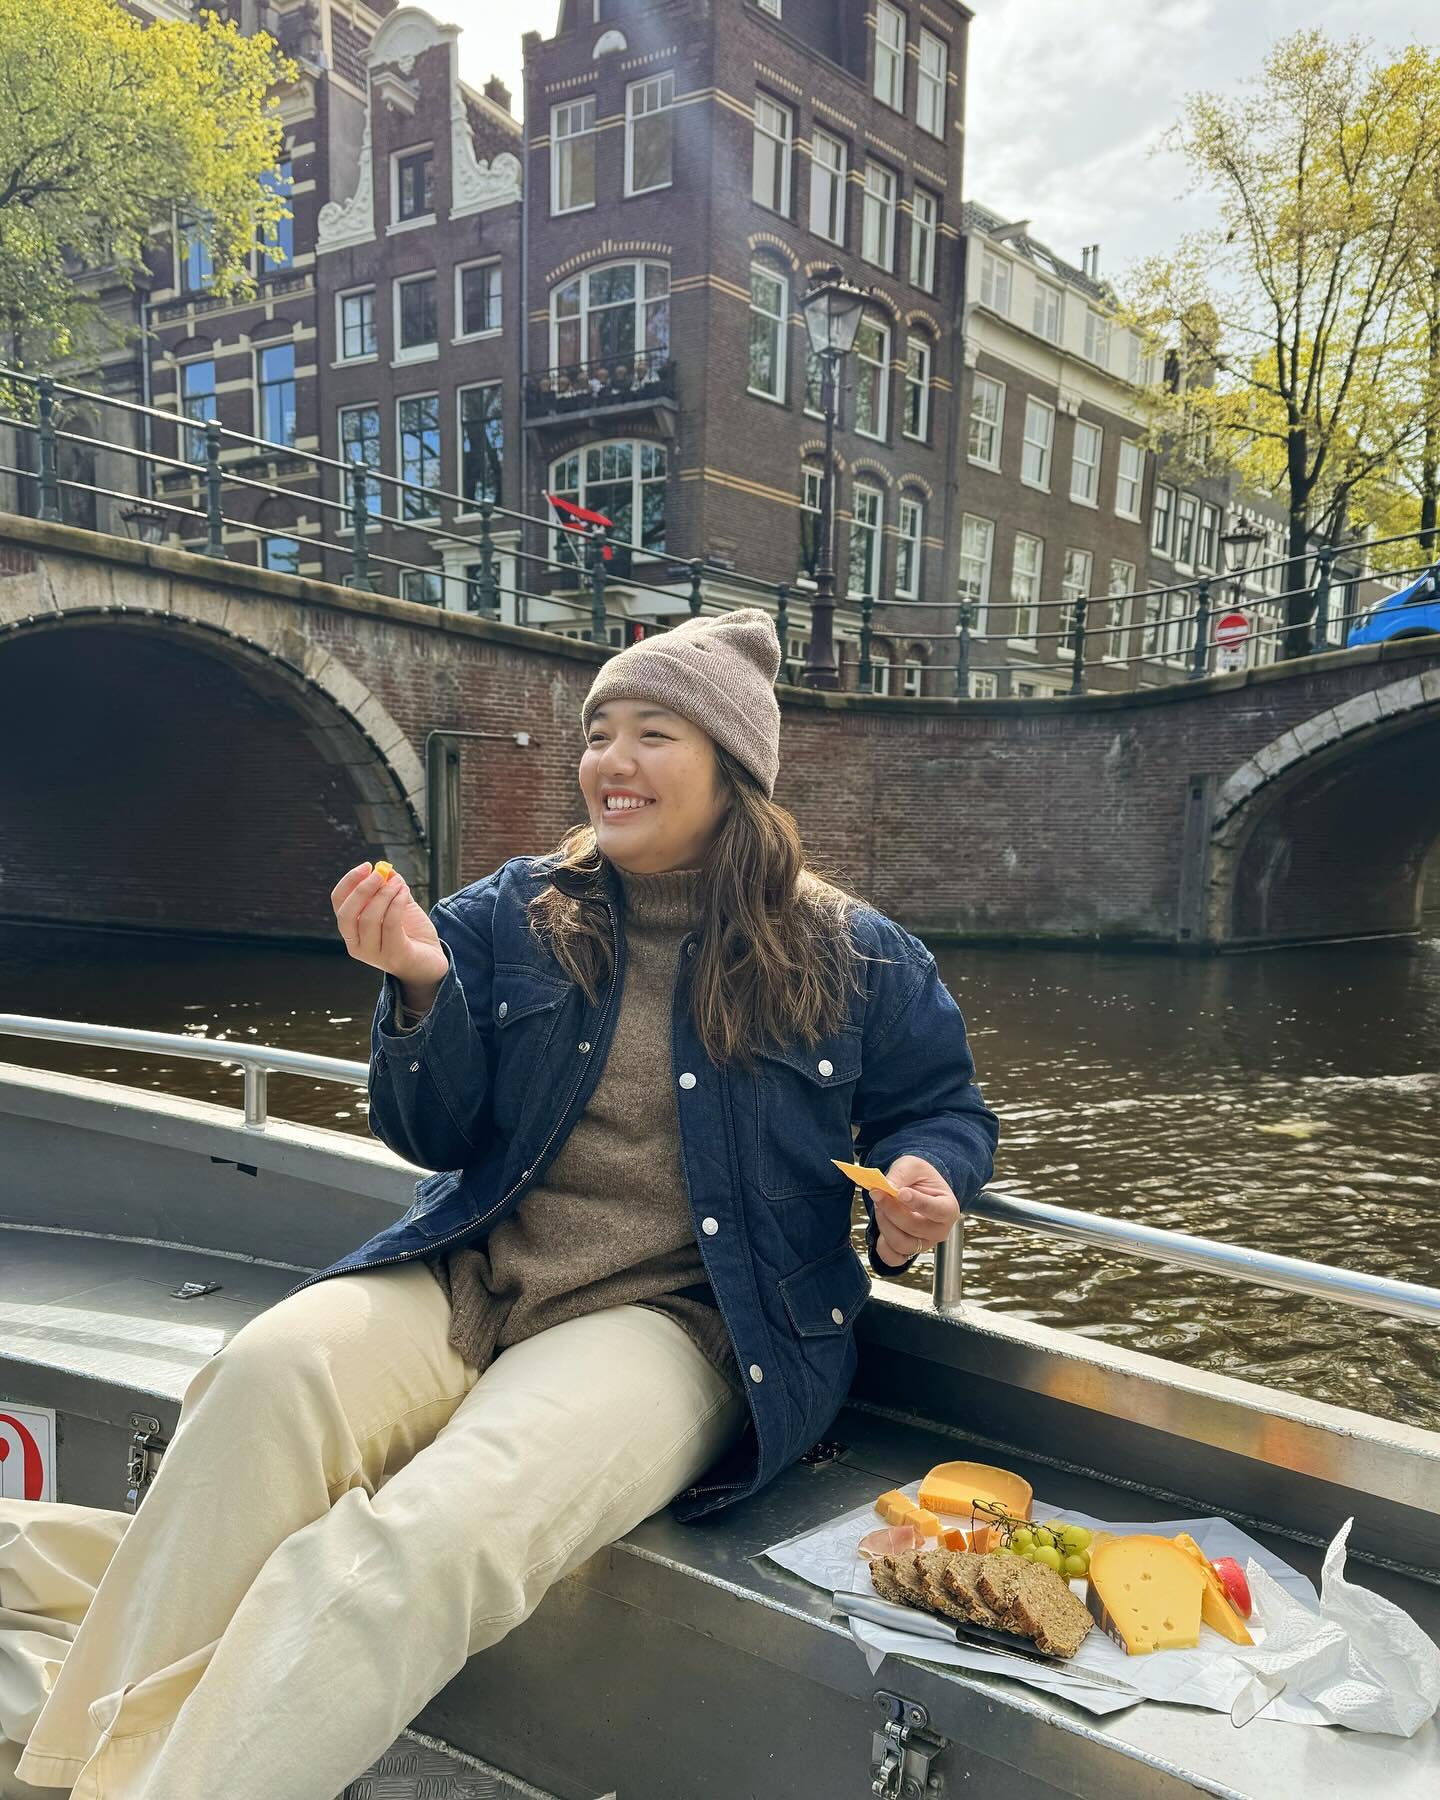 A few days well spent in Amsterdam! We caught up with old friends, manned our own motor boat and floated through the city canals, and snack on everything from Gouda to G&ouml;zleme!

Some of my favorite bites were Dutch apple pie from @cafepapeneilan